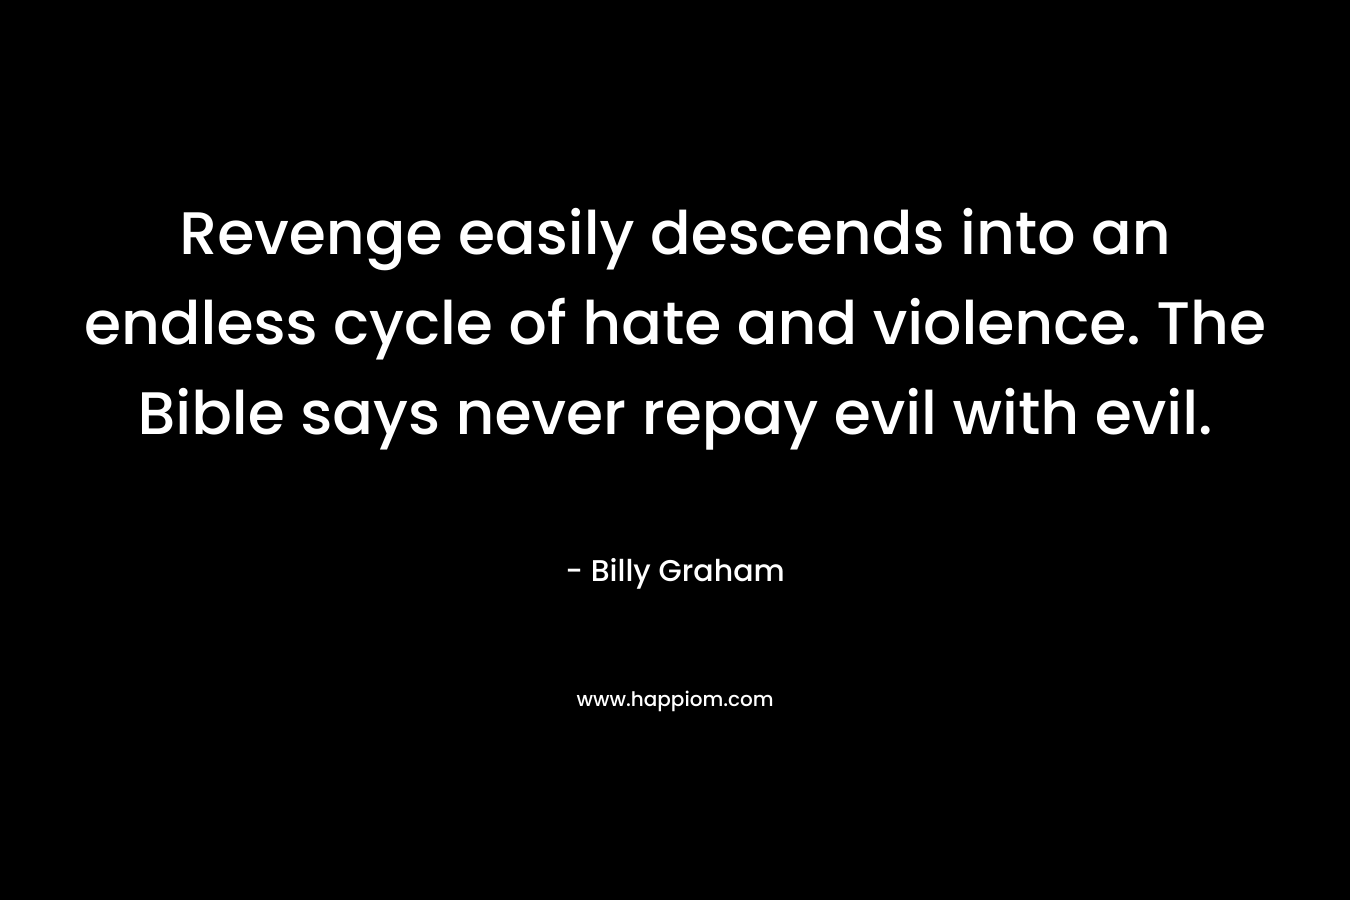 Revenge easily descends into an endless cycle of hate and violence. The Bible says never repay evil with evil. – Billy Graham